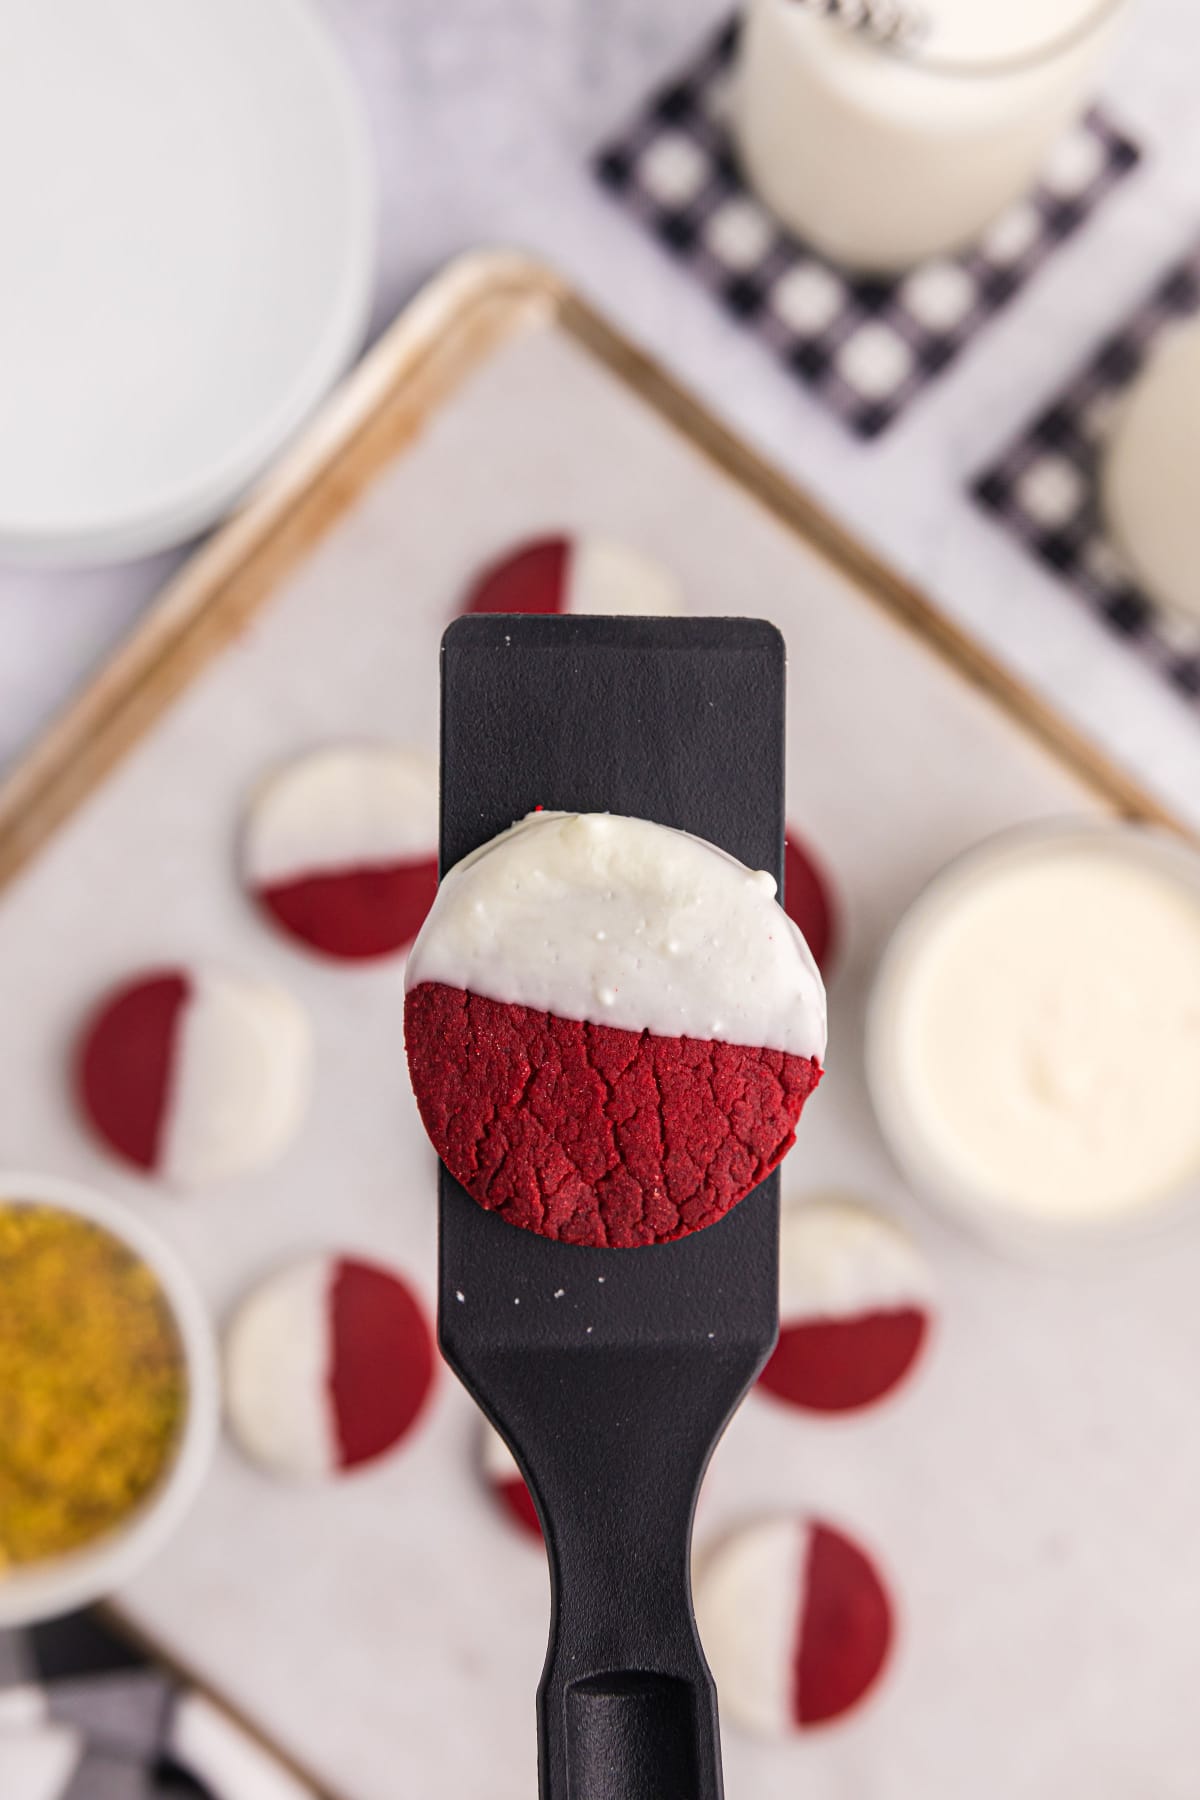 spatula holding red velvet shortbread cookie dipped in white chocolate